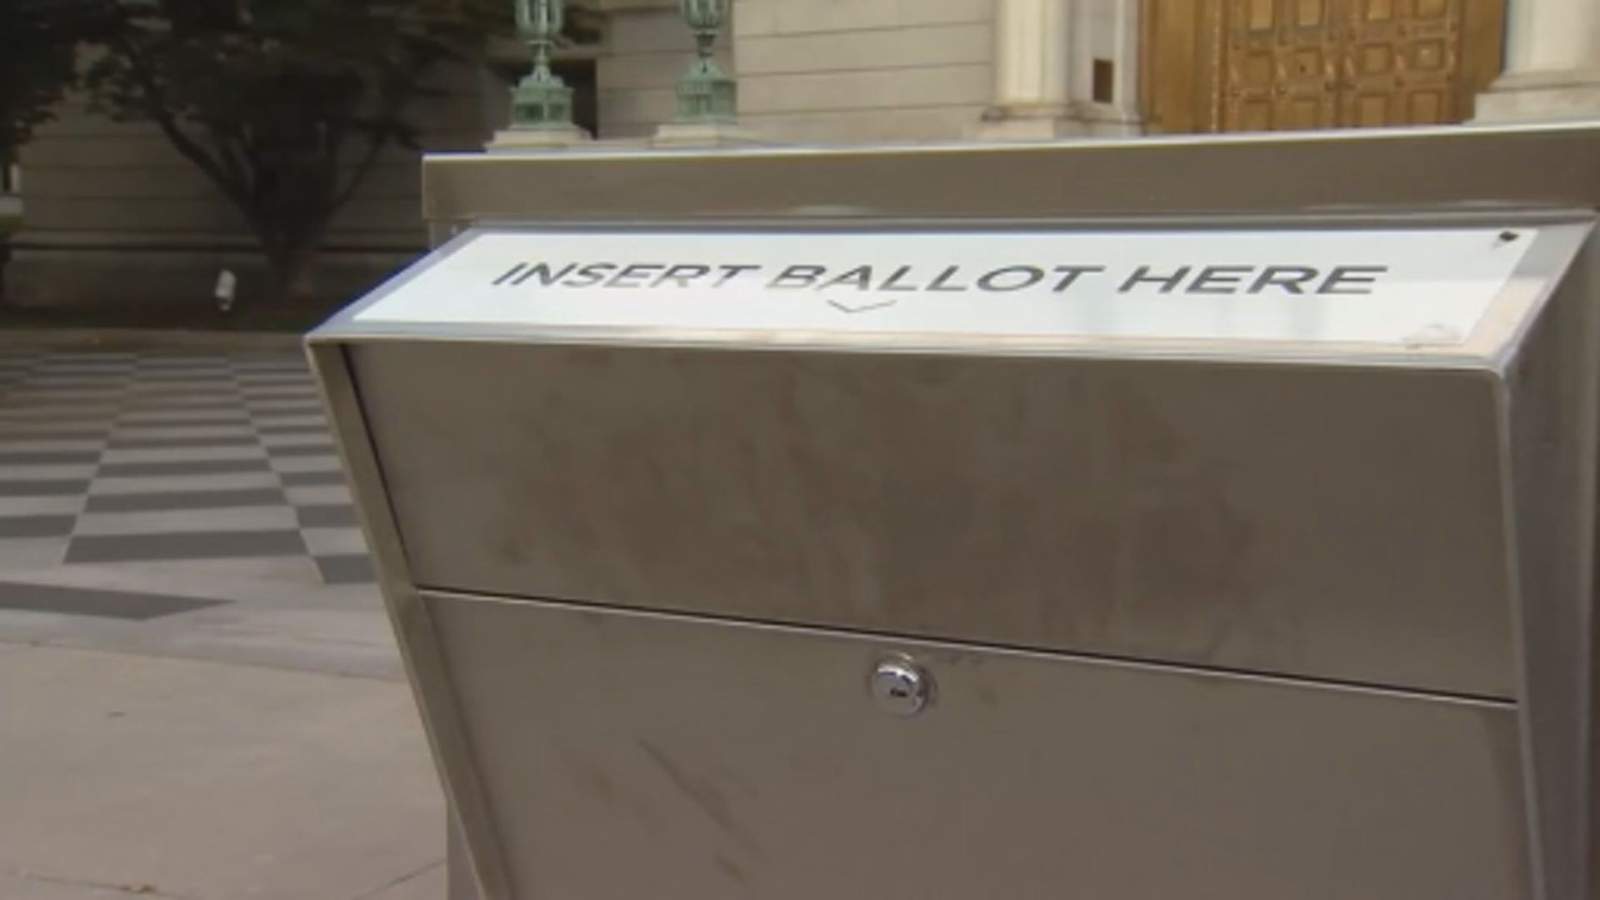 An all-out war over mail voting has erupted in courts across the U.S. Here’s what’s at stake.